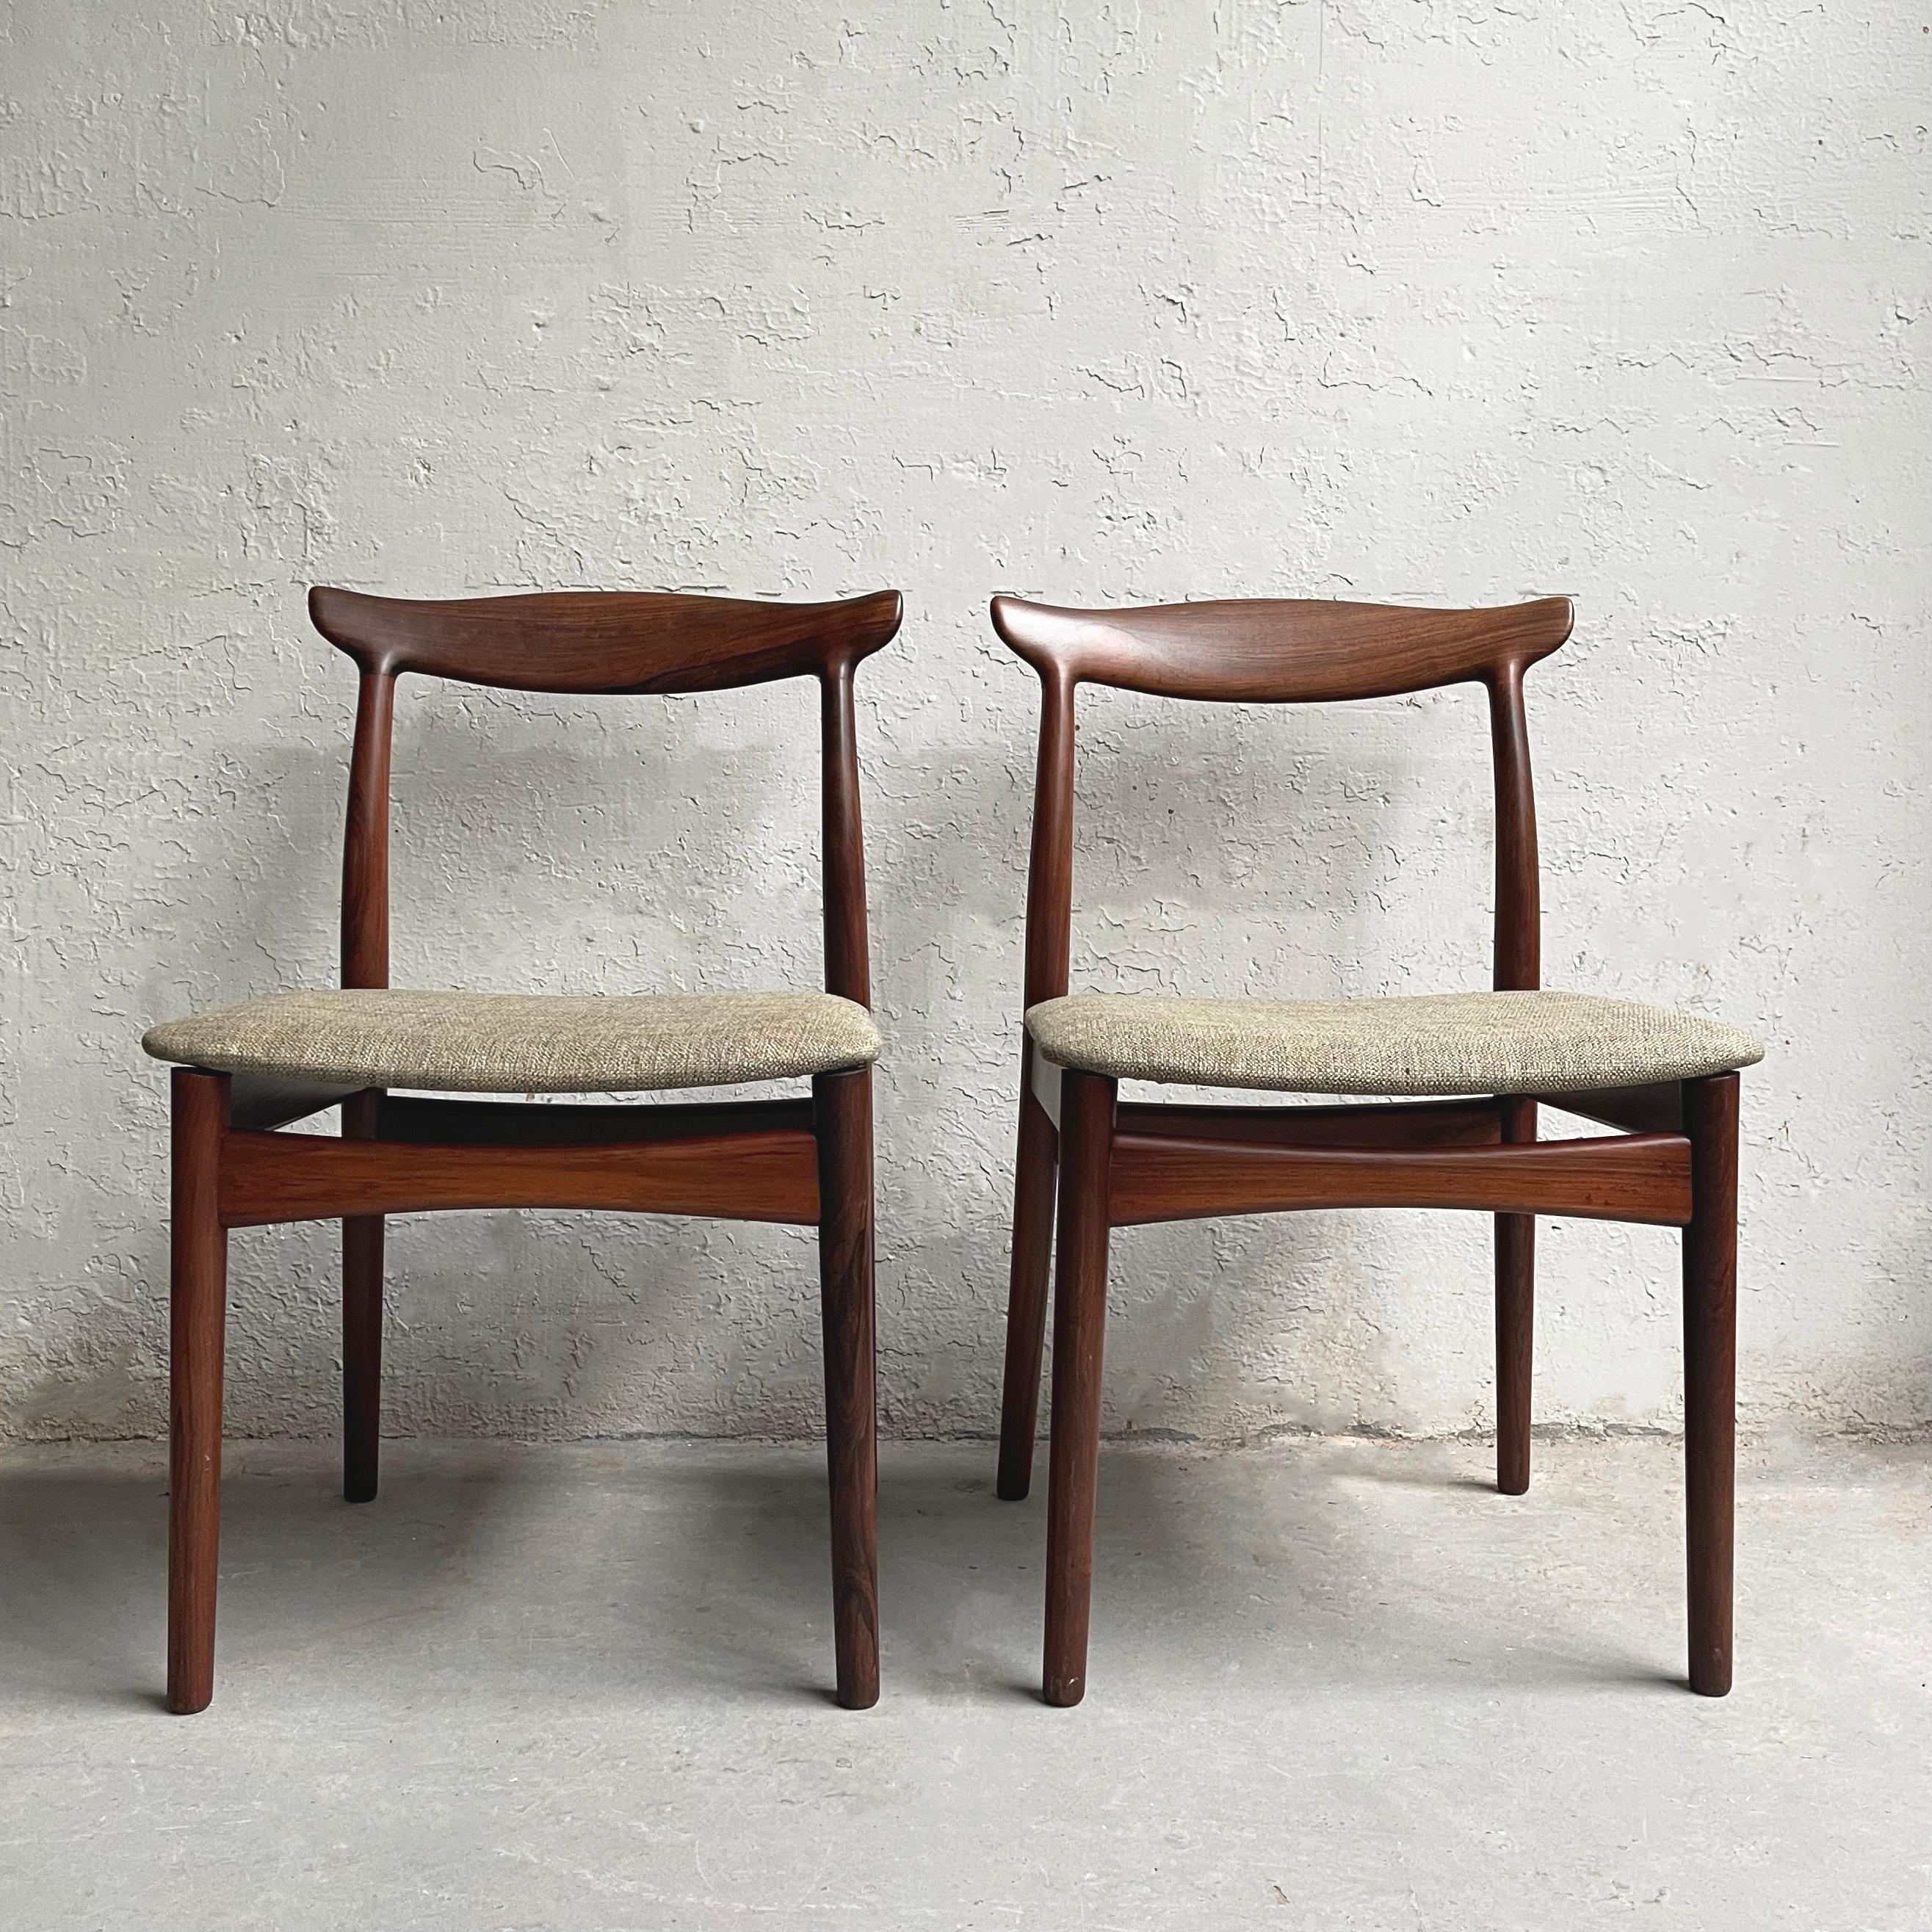 Pair of elegant, Danish modern, model 112 chairs by Erik Wørts for Vamo Møbelfabrik feature rosewood frames with cow horn backs and floating upholstered seats in muted green tweed.